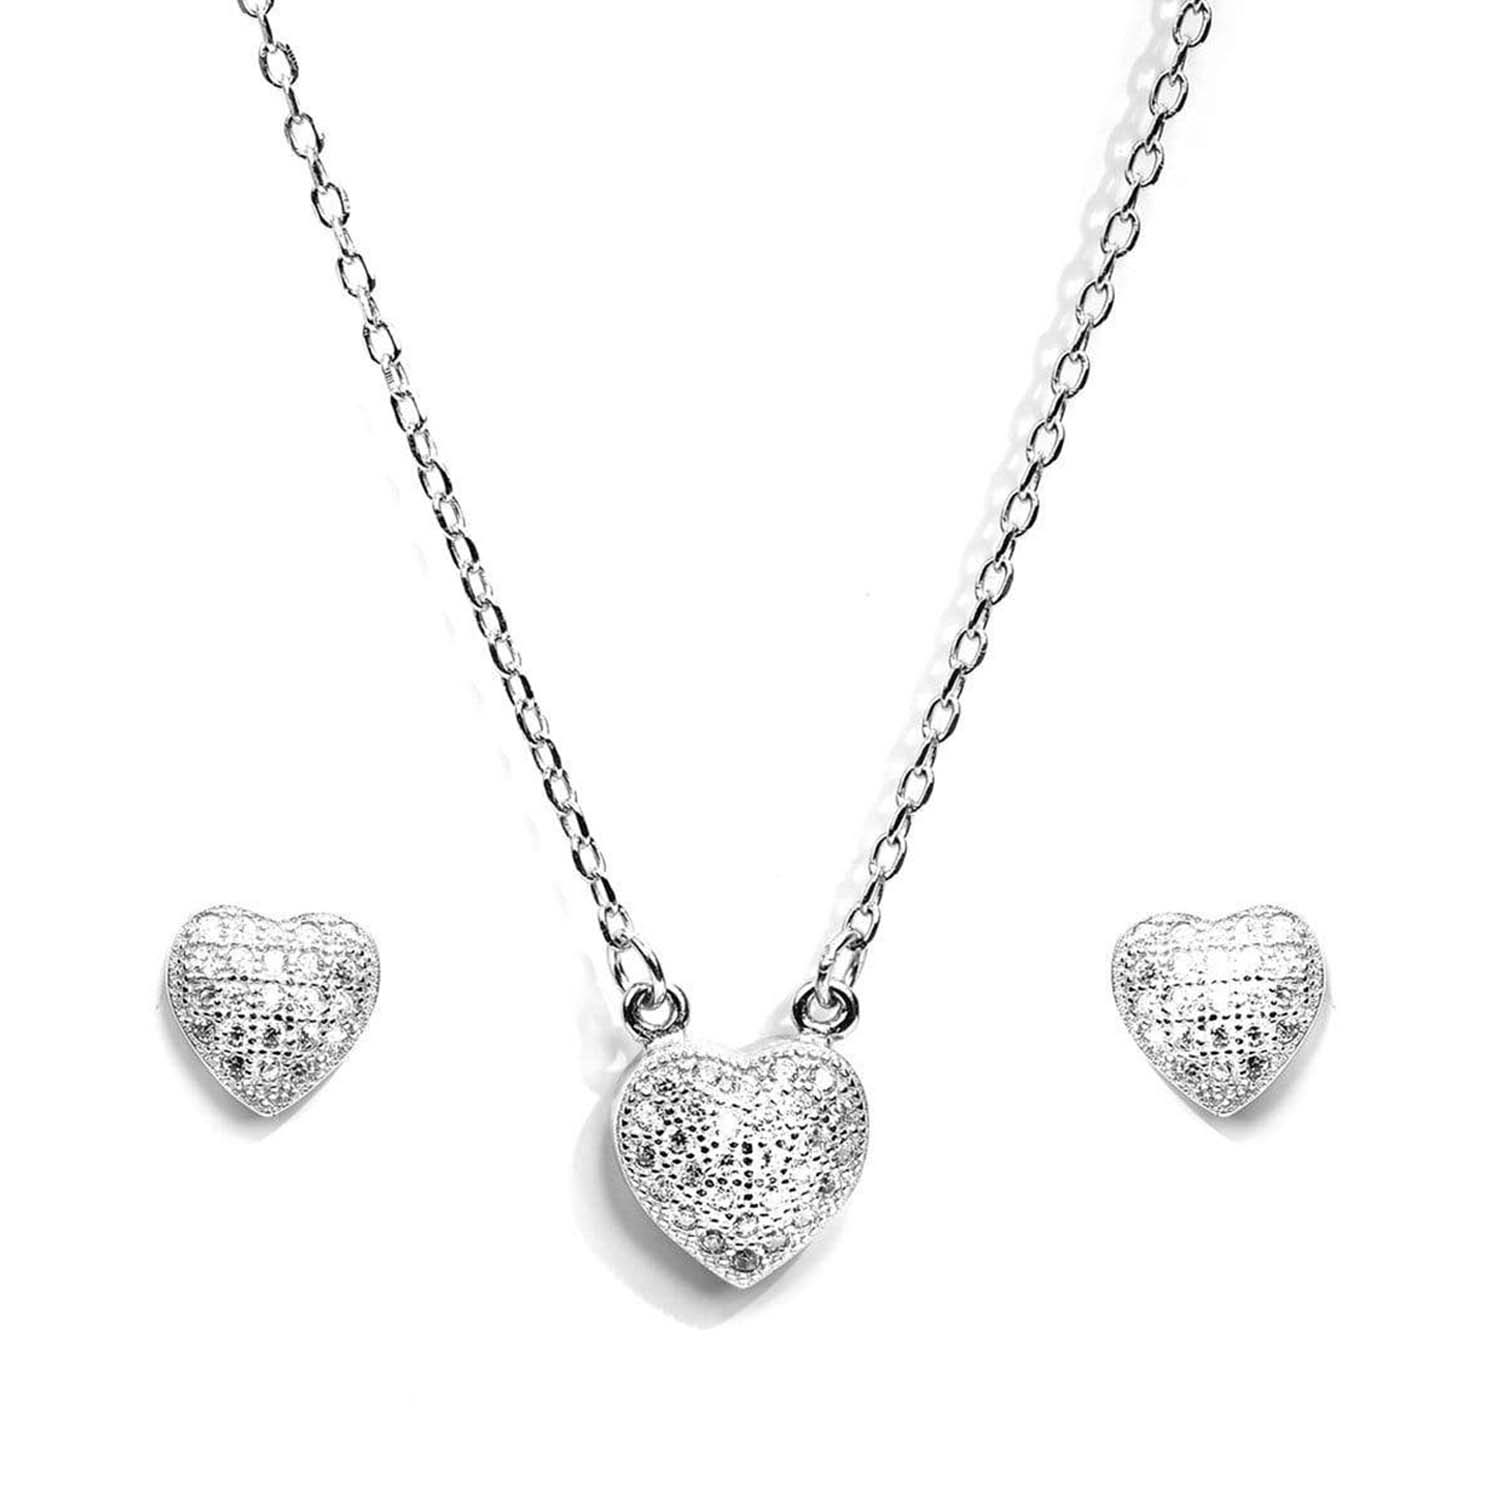 Tug At My Heart 925 Silver Jewellery Set